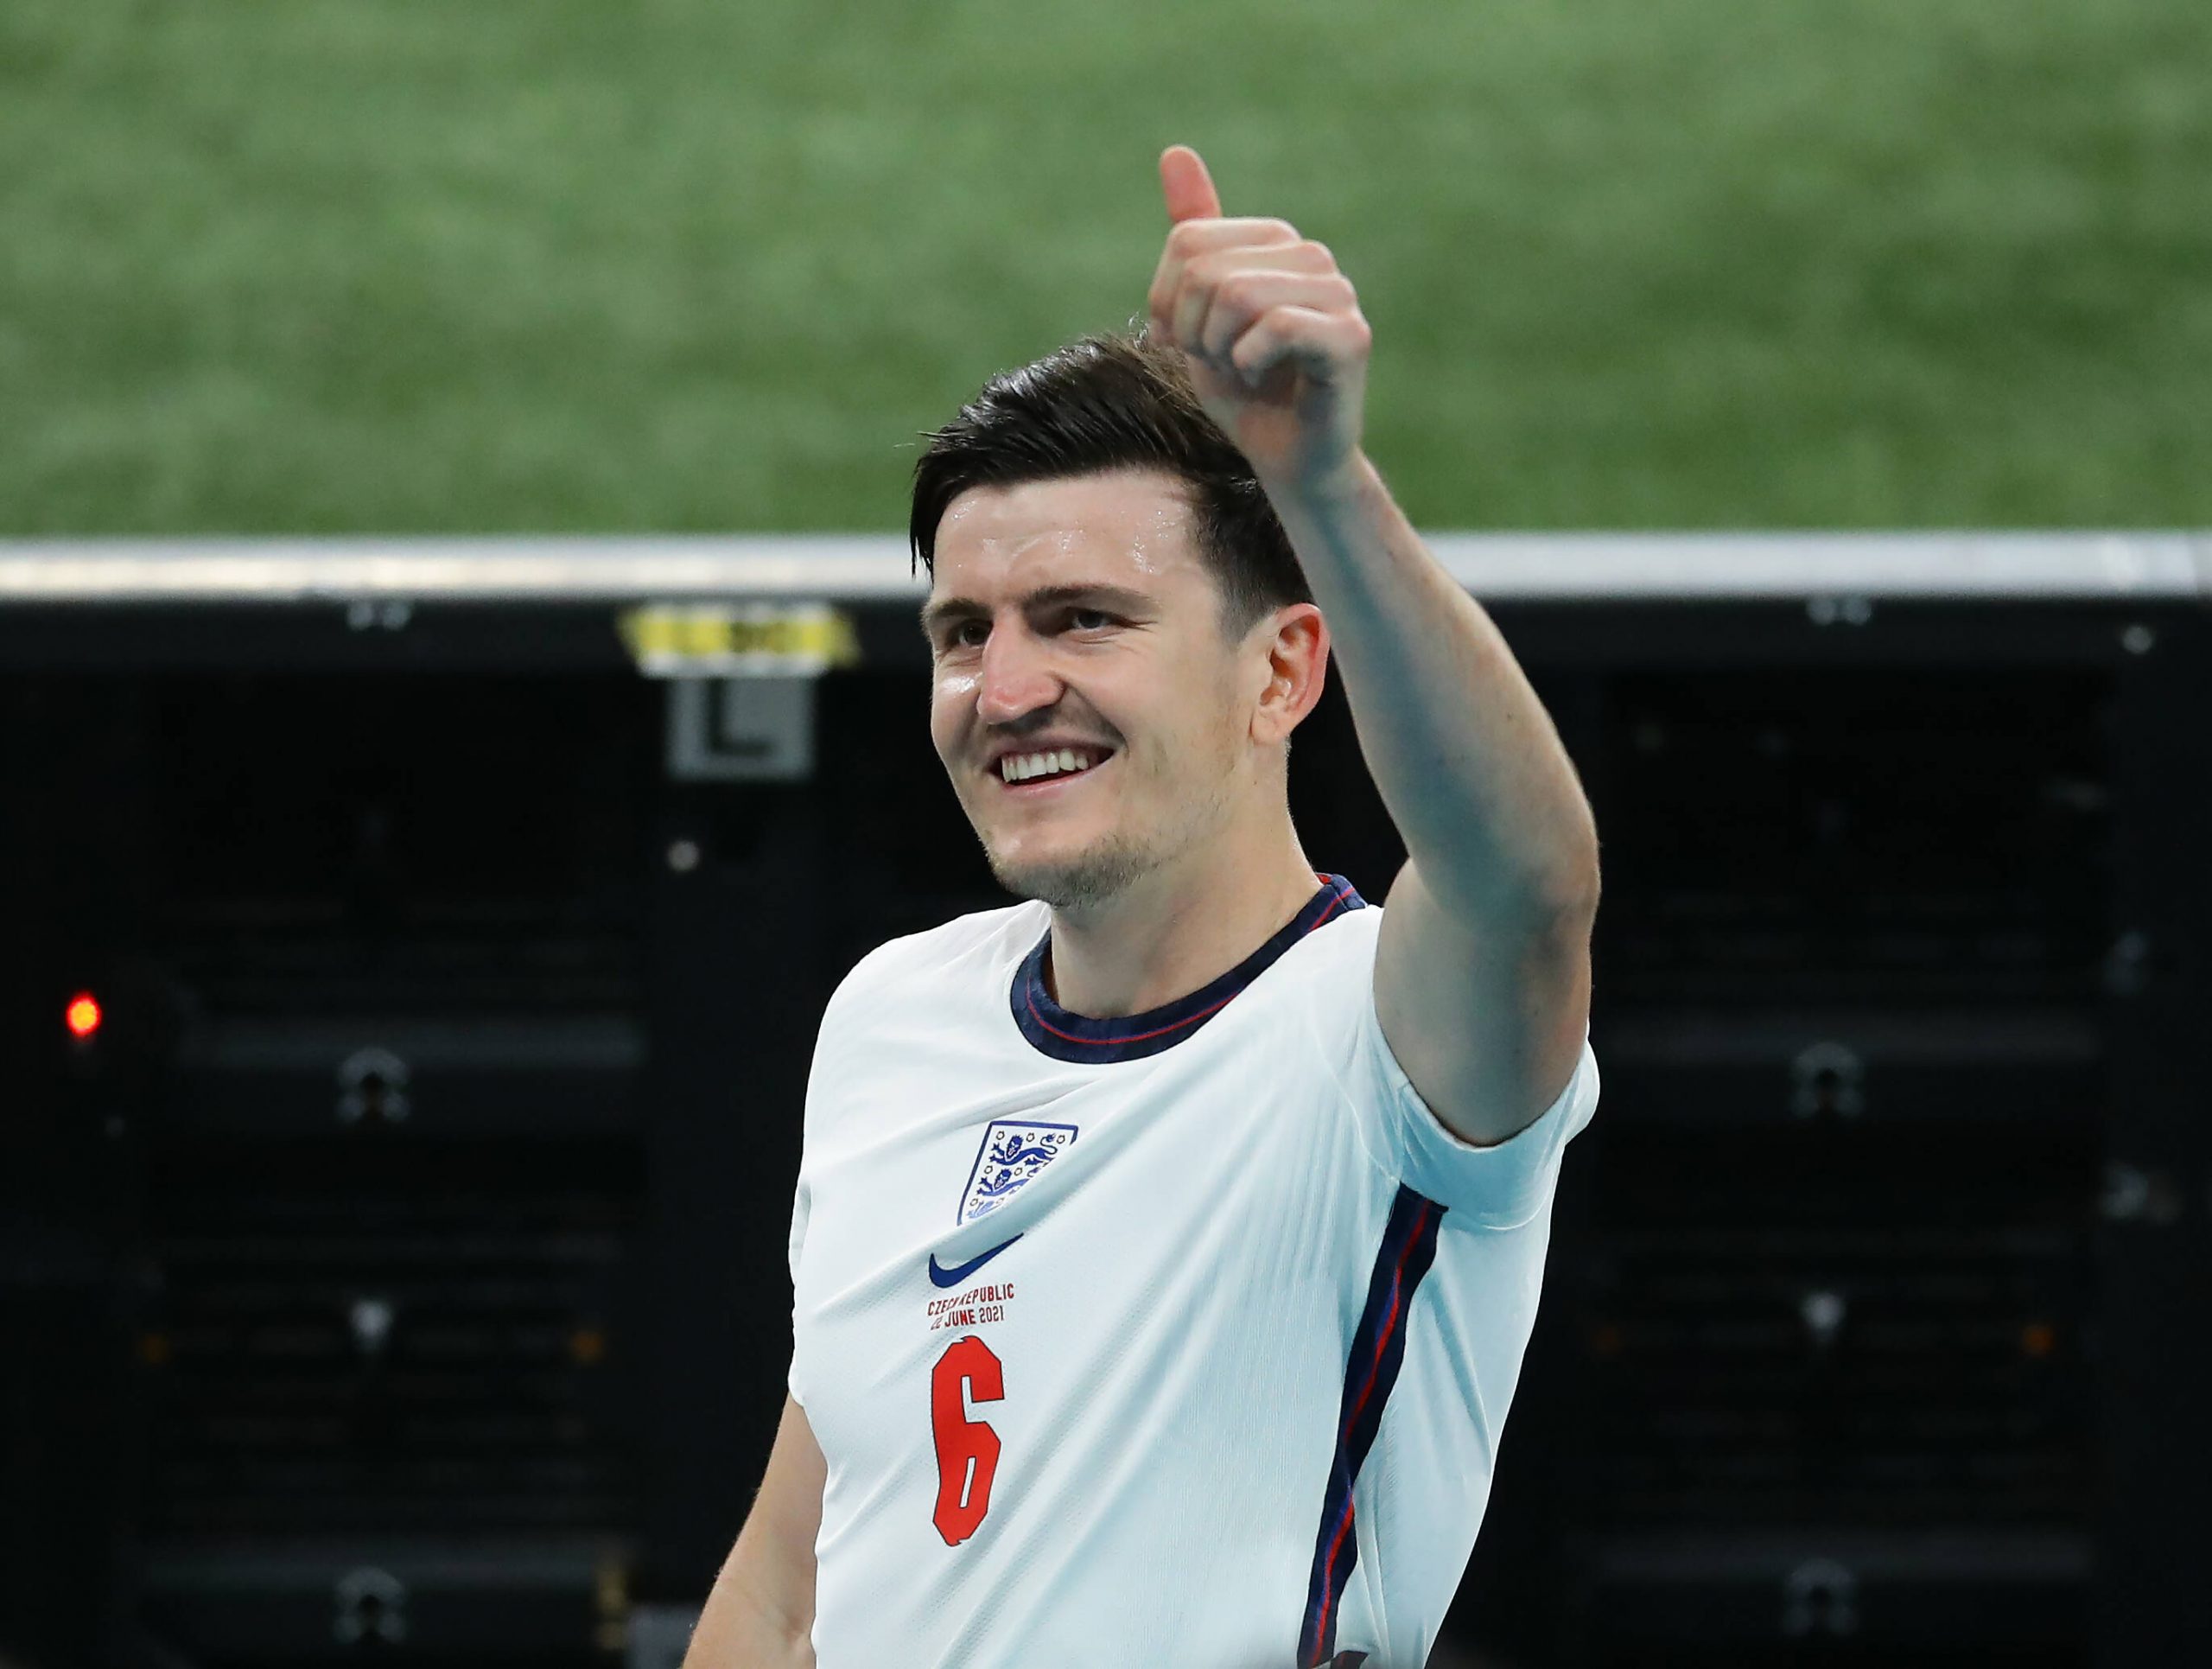 Captain Harry Maguire tells pals that he will not be forced out of Manchester United as angry fan sends bomb threat.